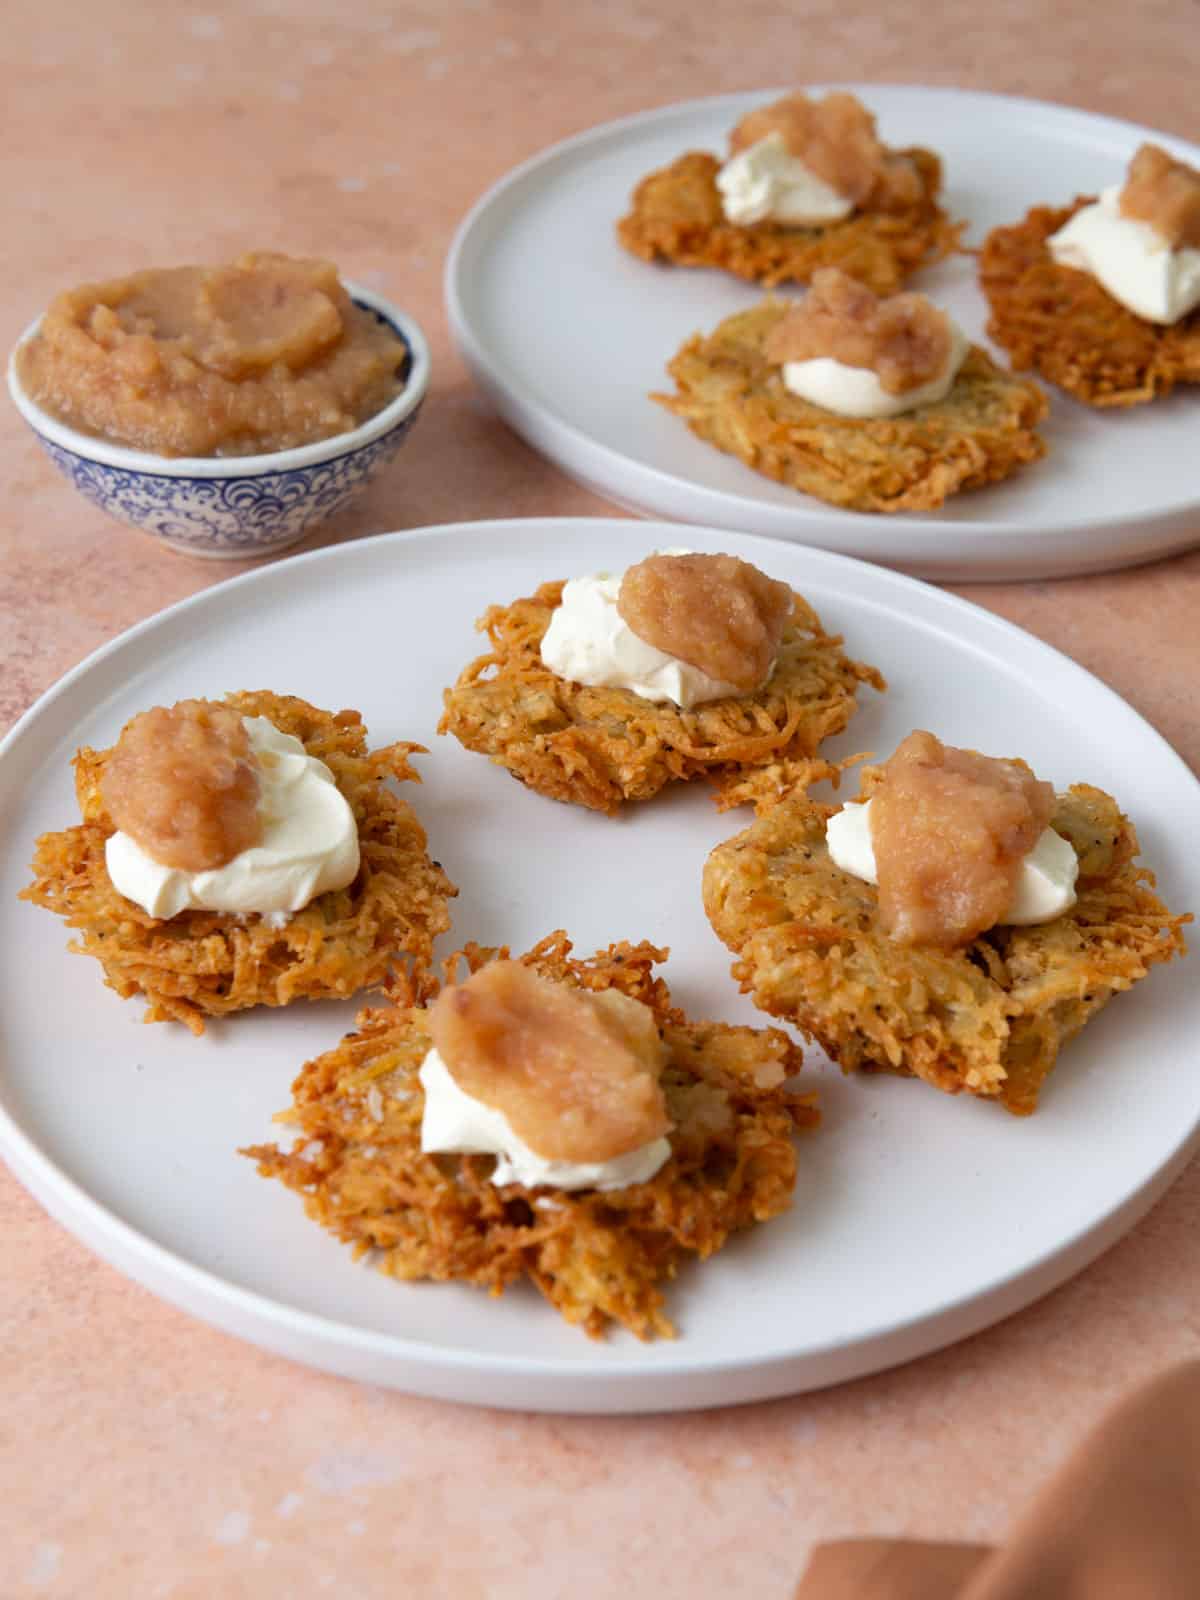 Celery root and potato latkes topped with applesauce and sour cream.